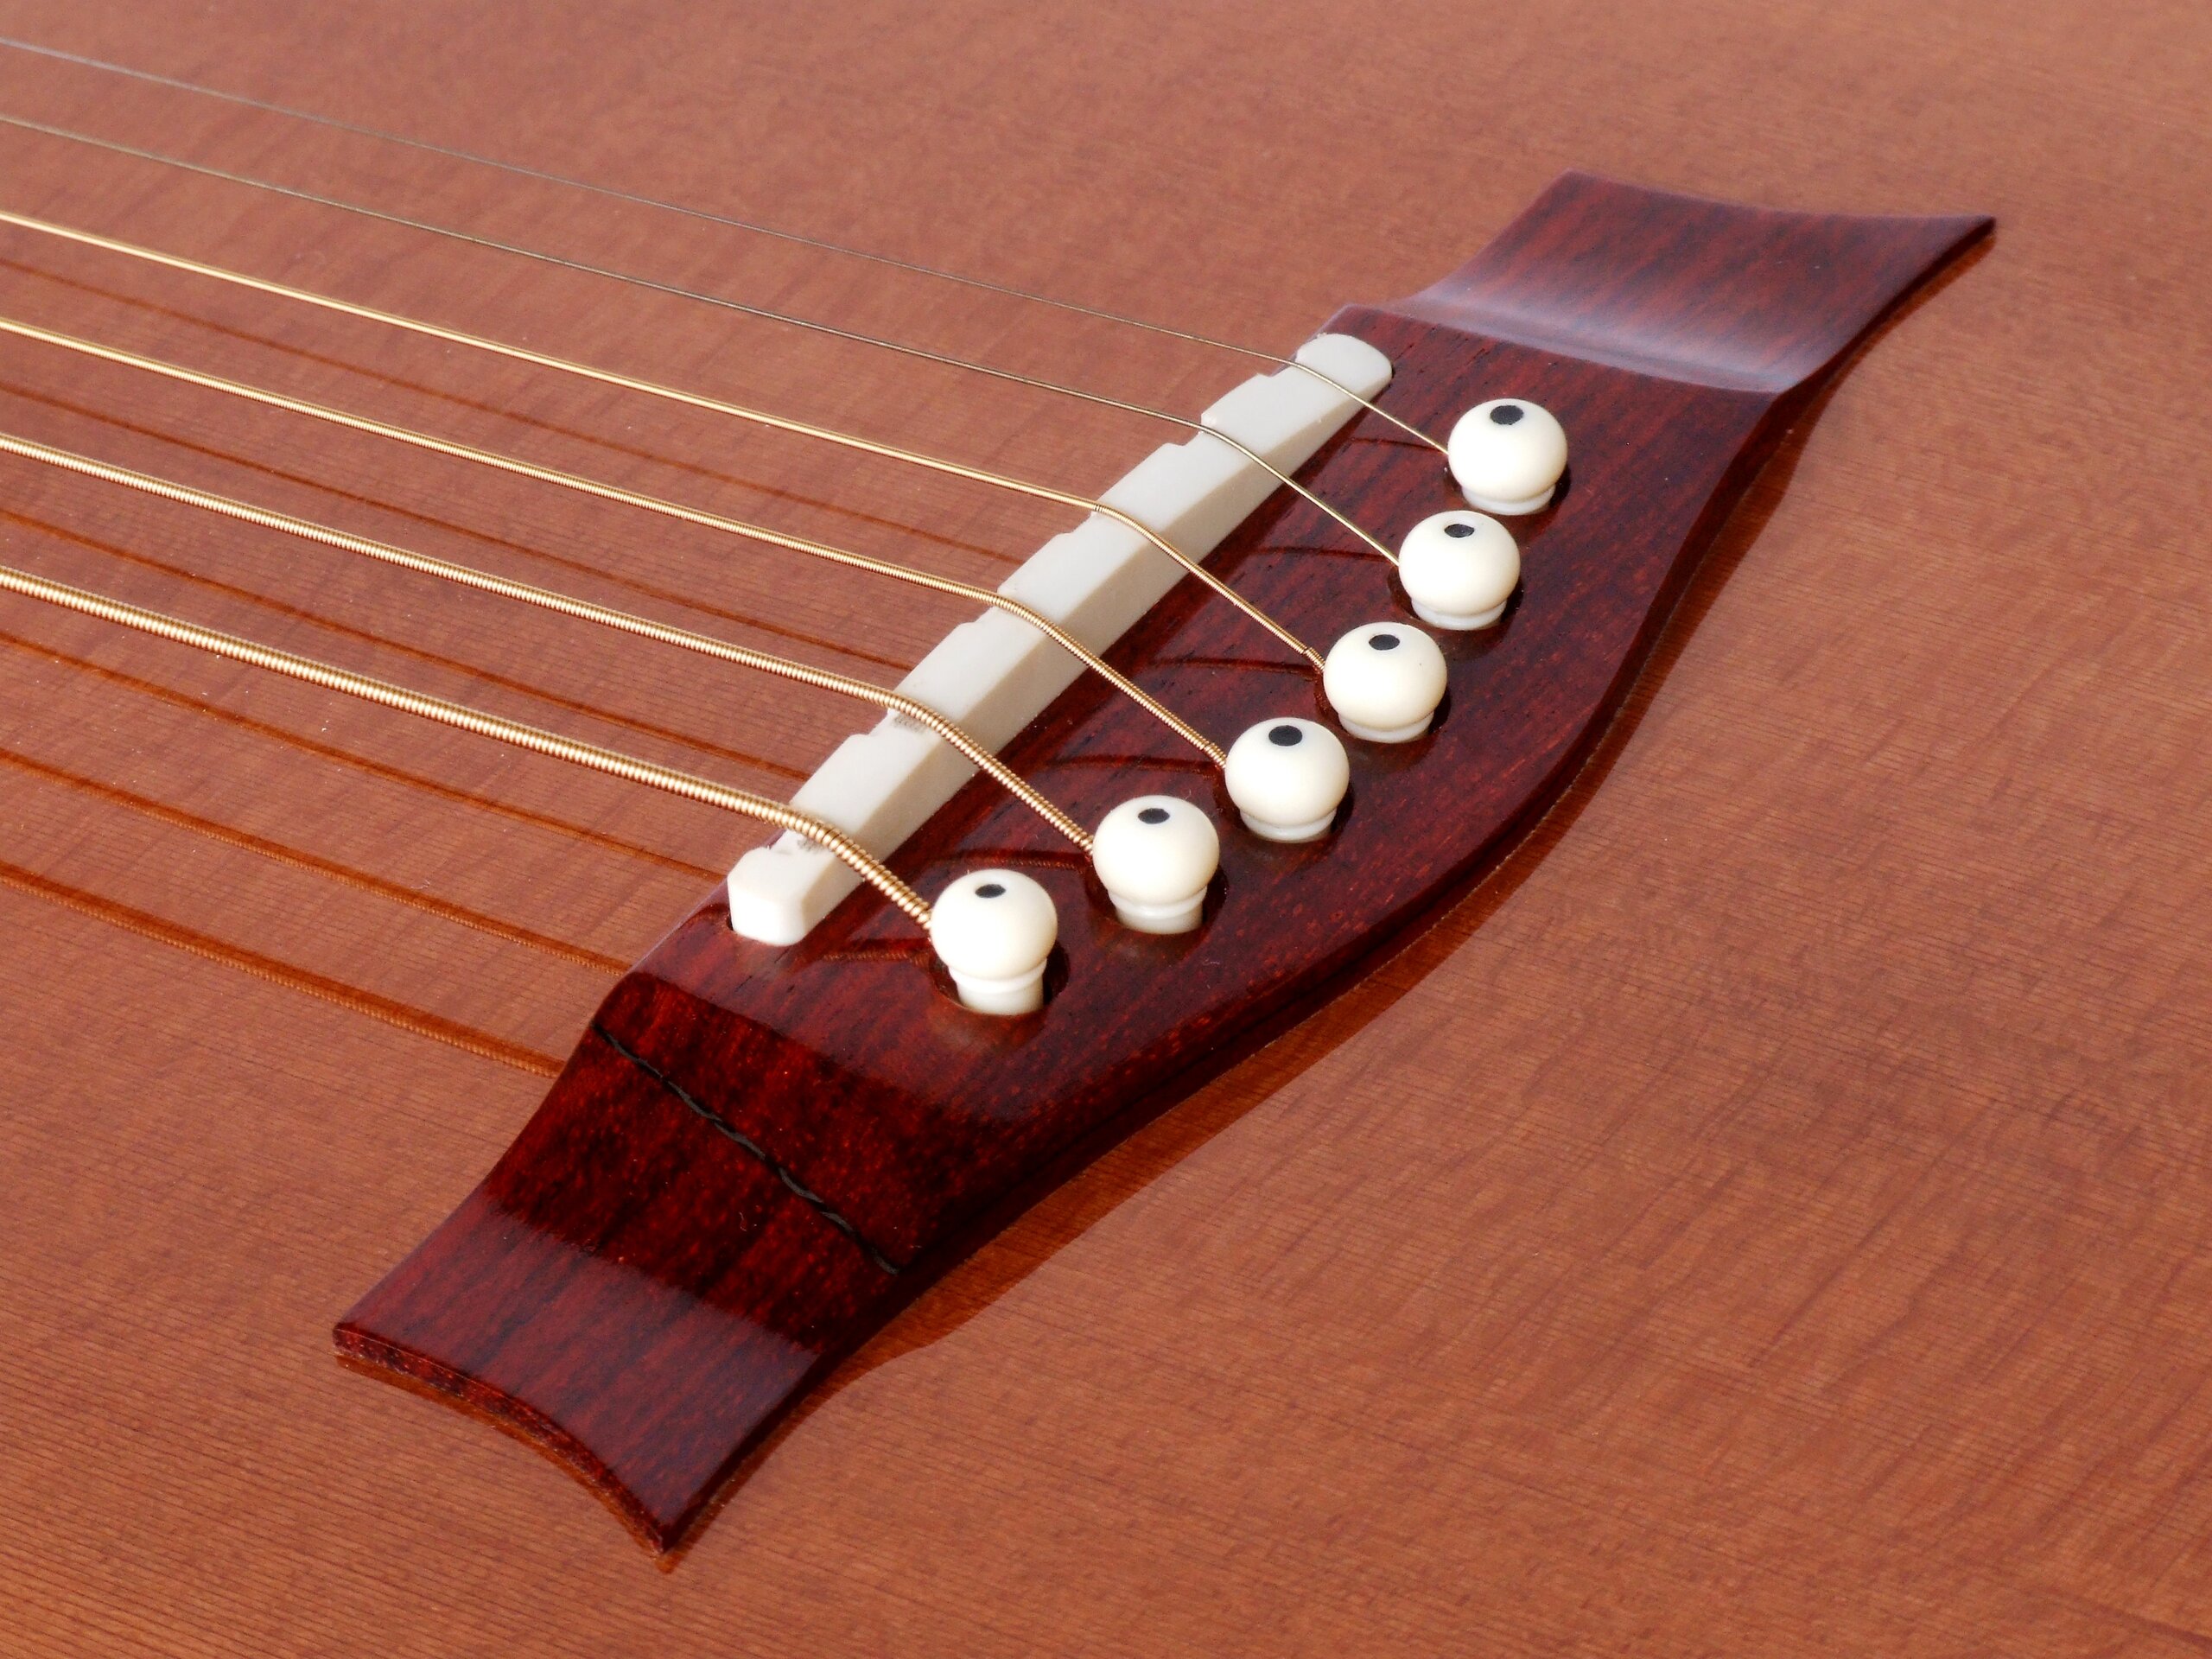 Carbon fibre reinforced bridge on a steel string guitar with a redwood top